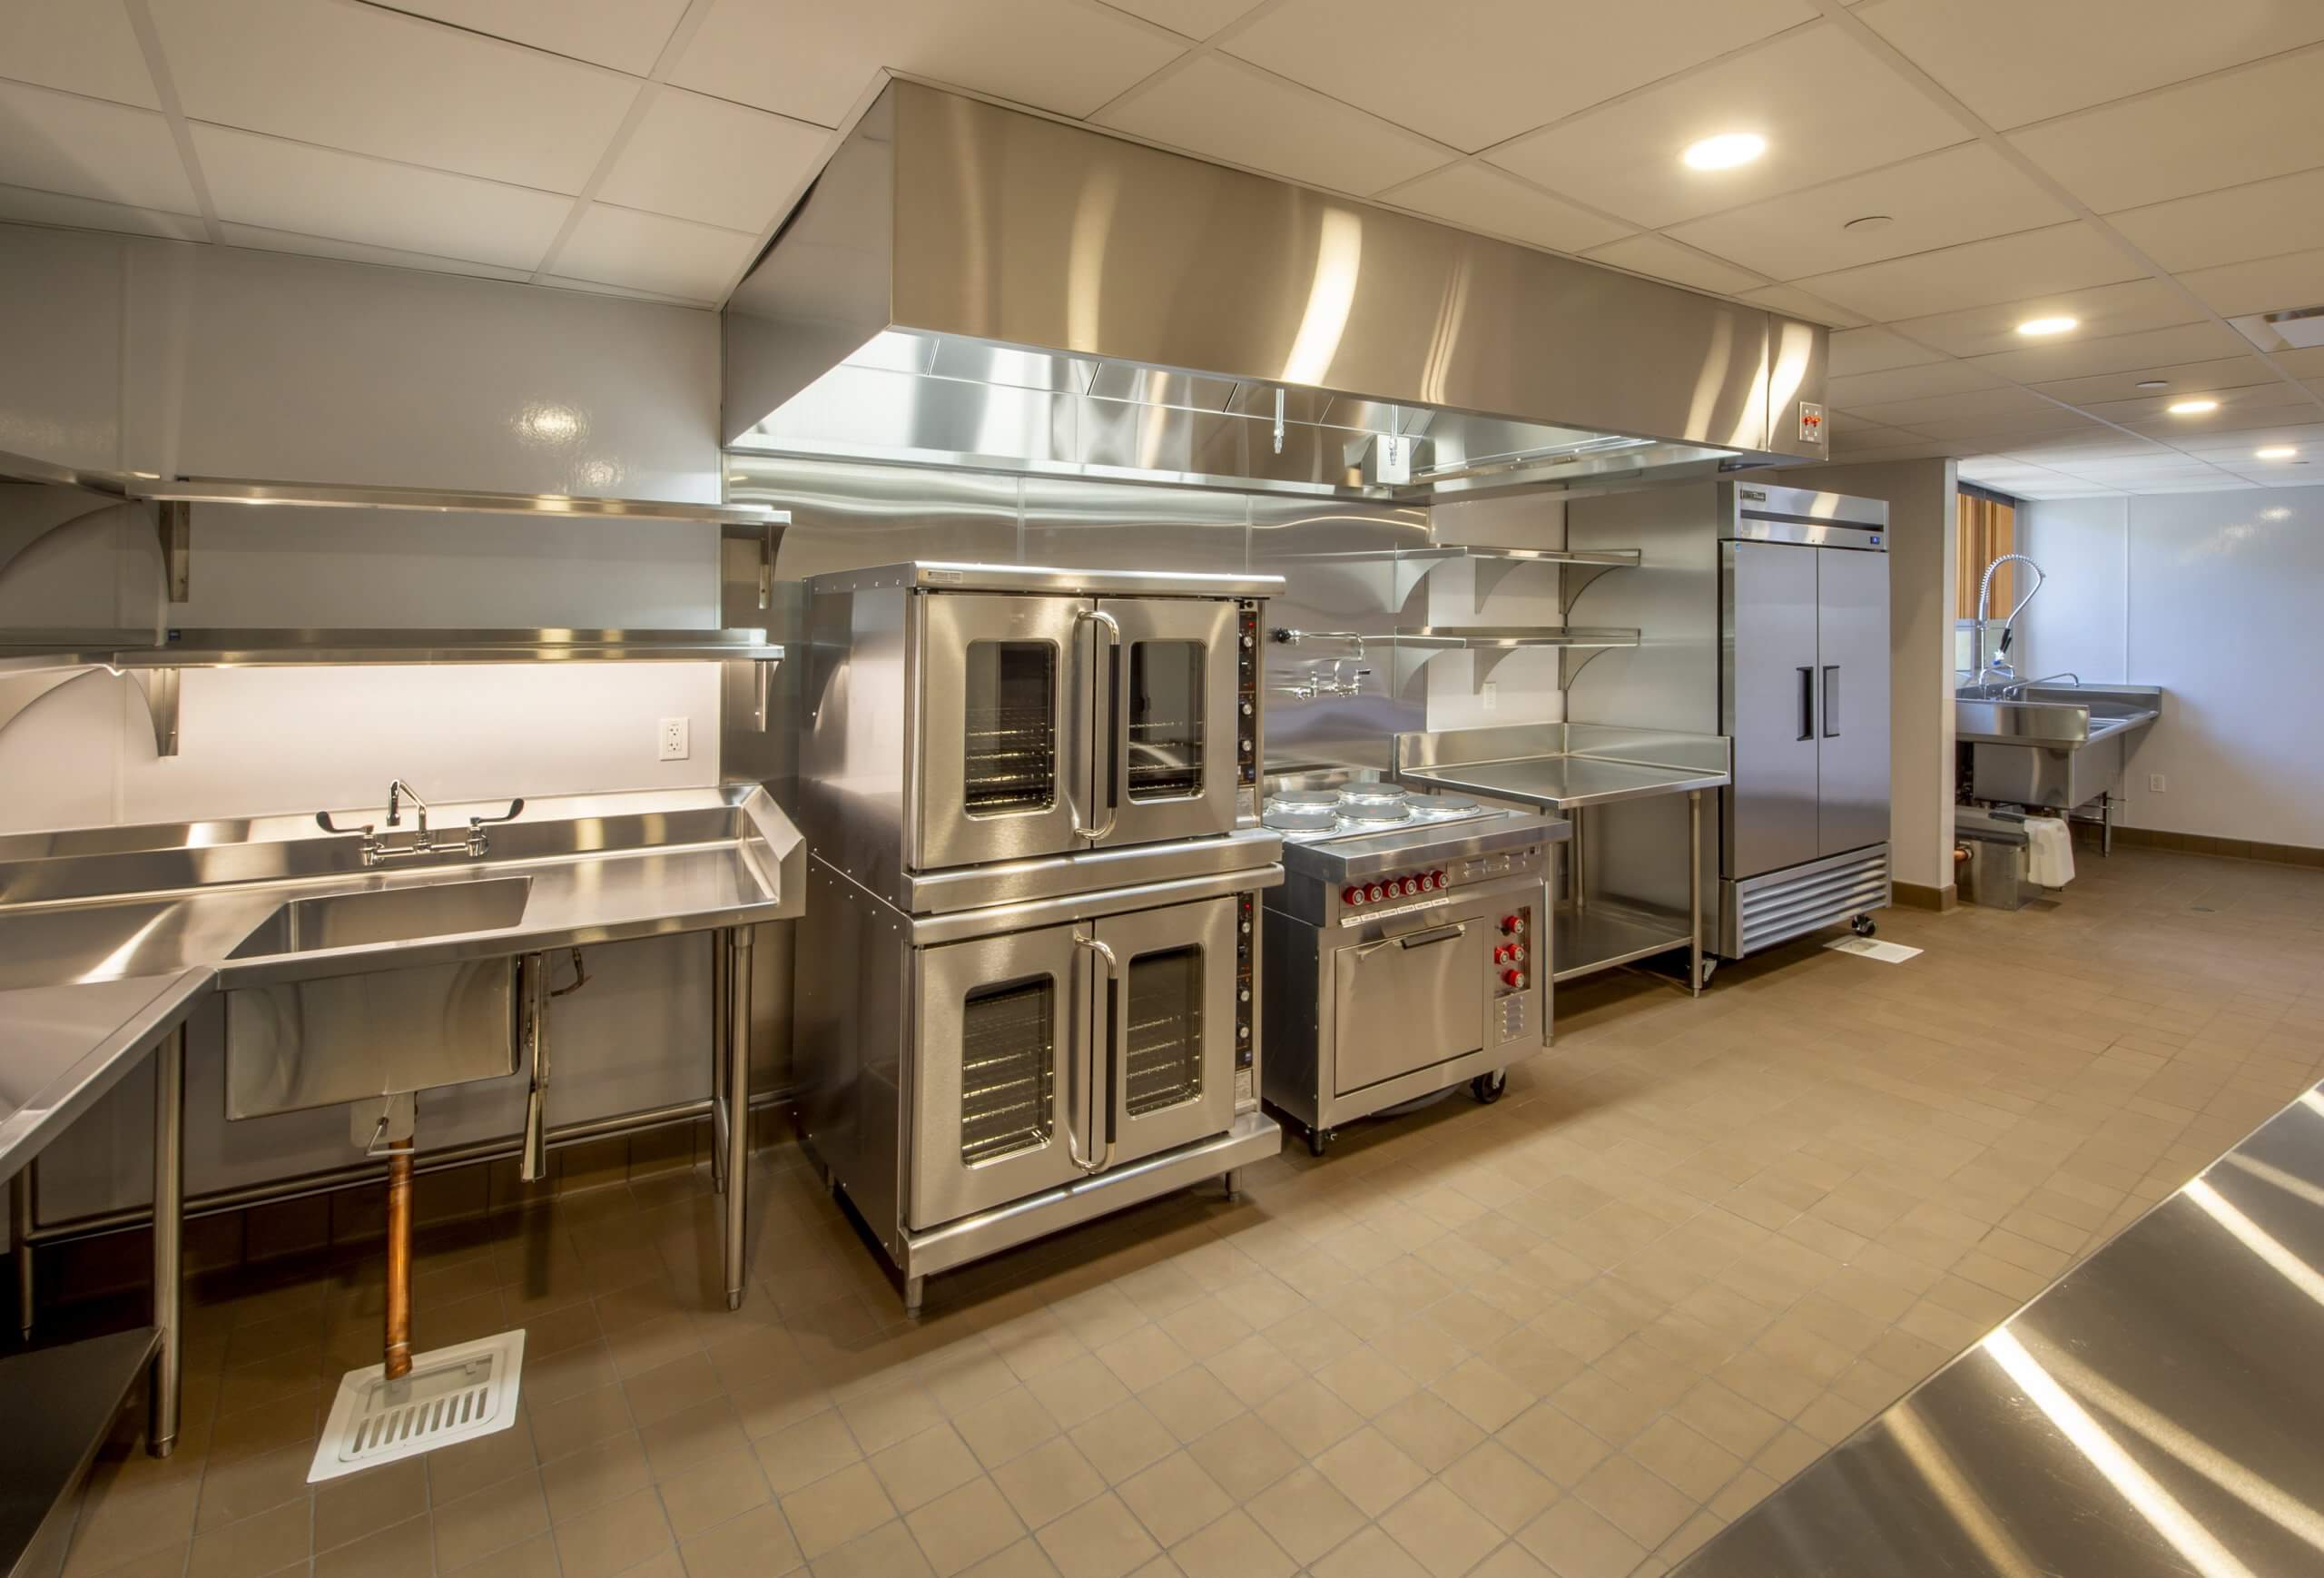 Part of an empty, immaculate industrial kitchen featuring stainless steel appliances.